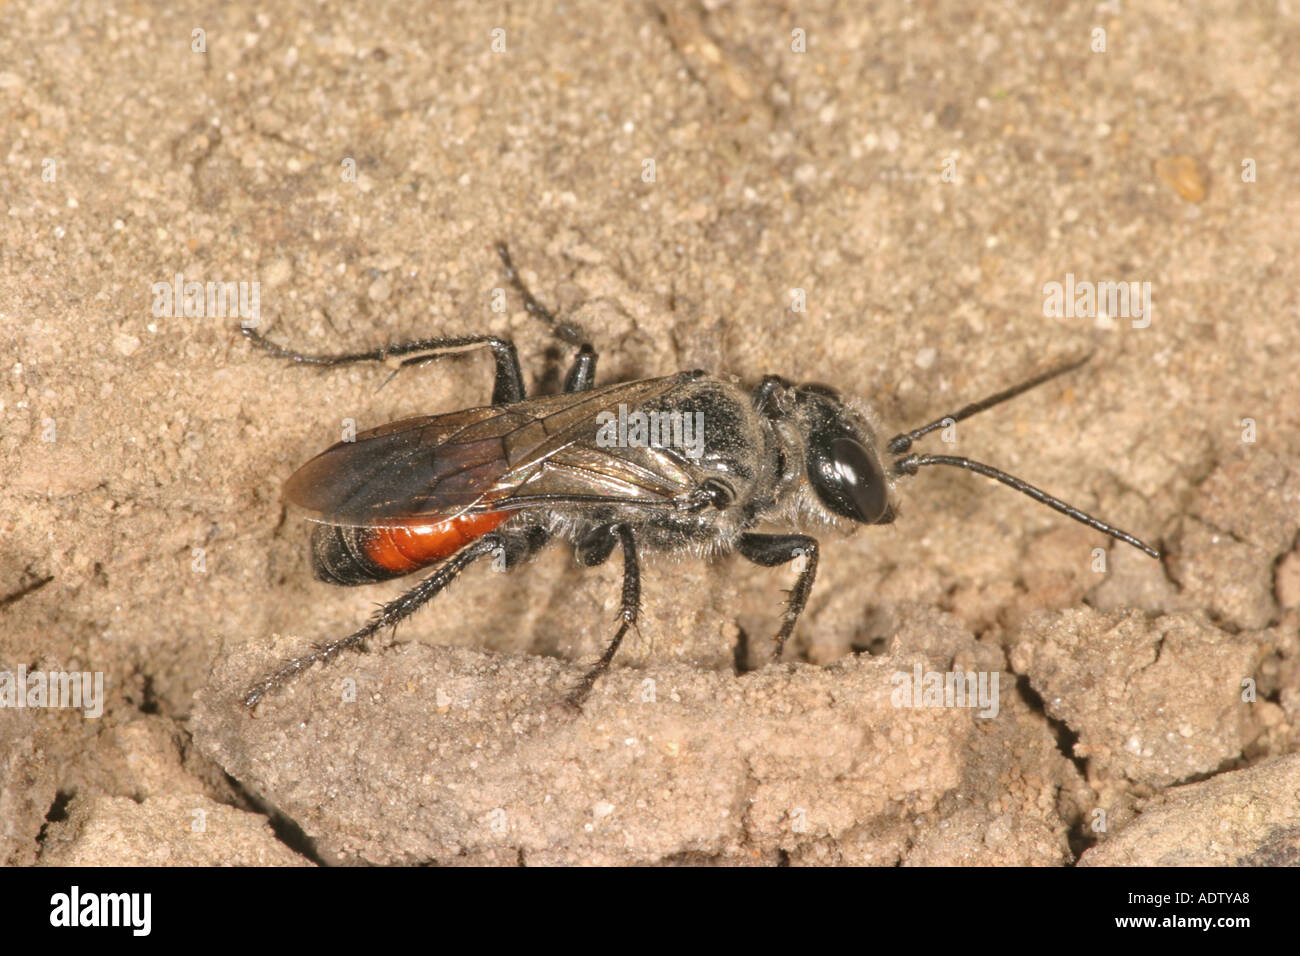 Solitary Wasp Astata boops Female on sand Stock Photo